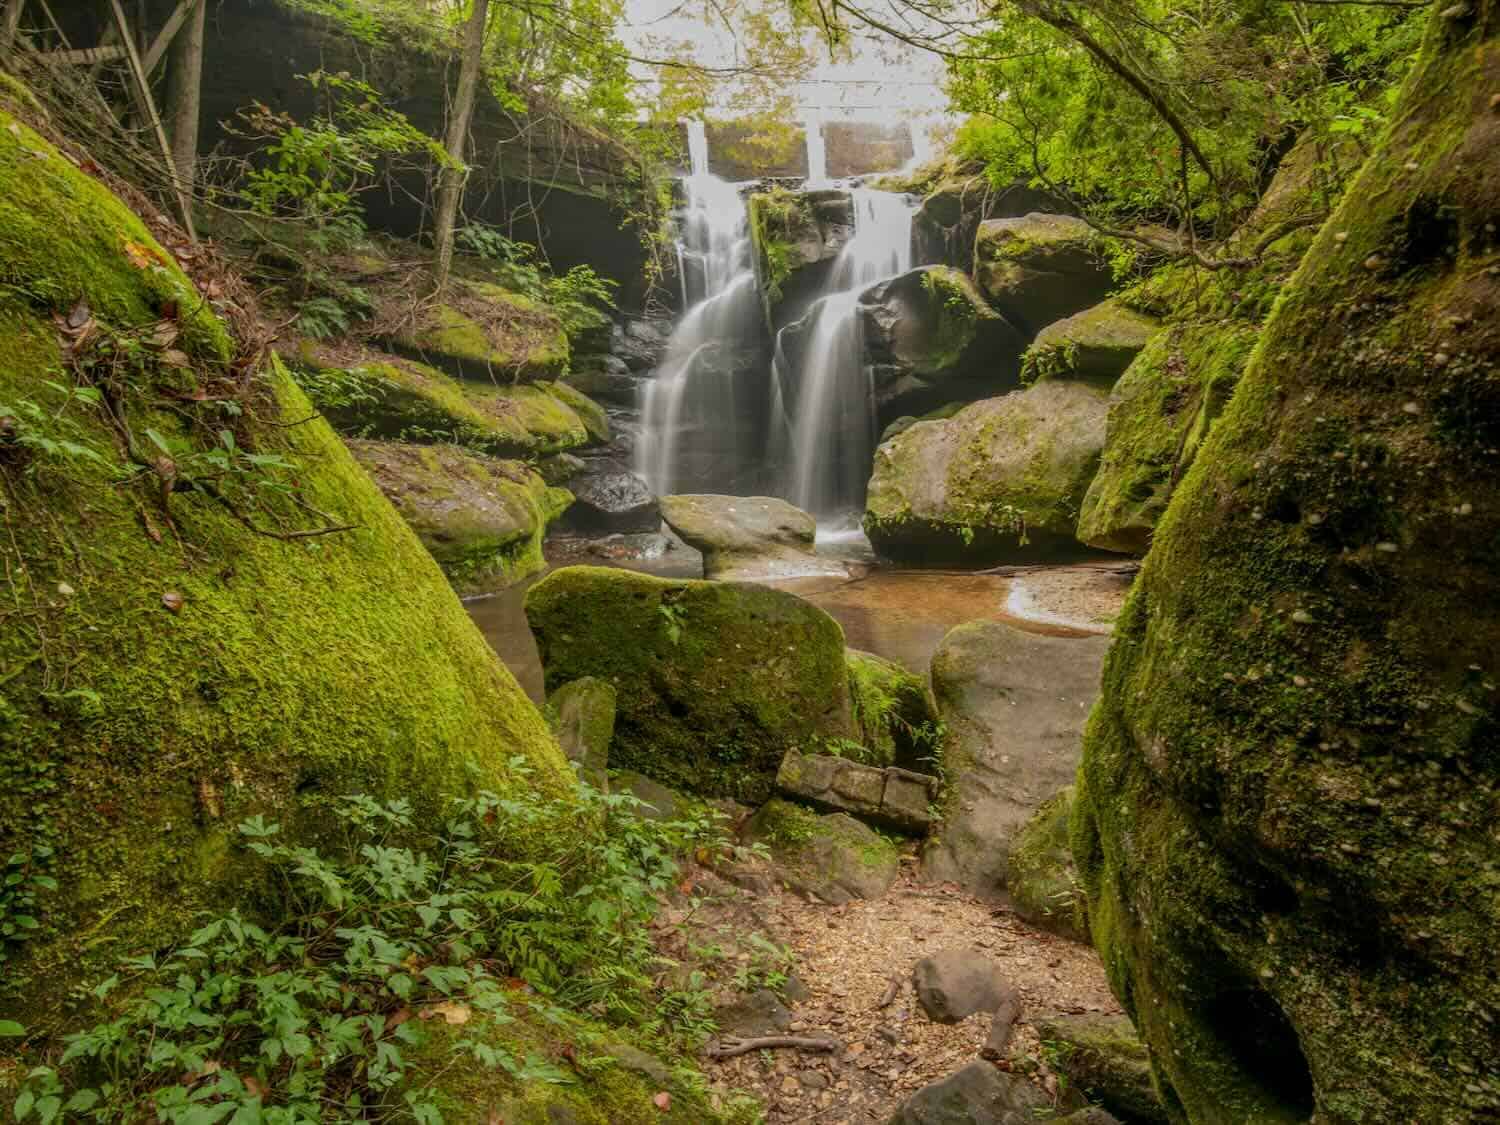 Dismals Canyon: Off-the-Beaten-Path in Alabama